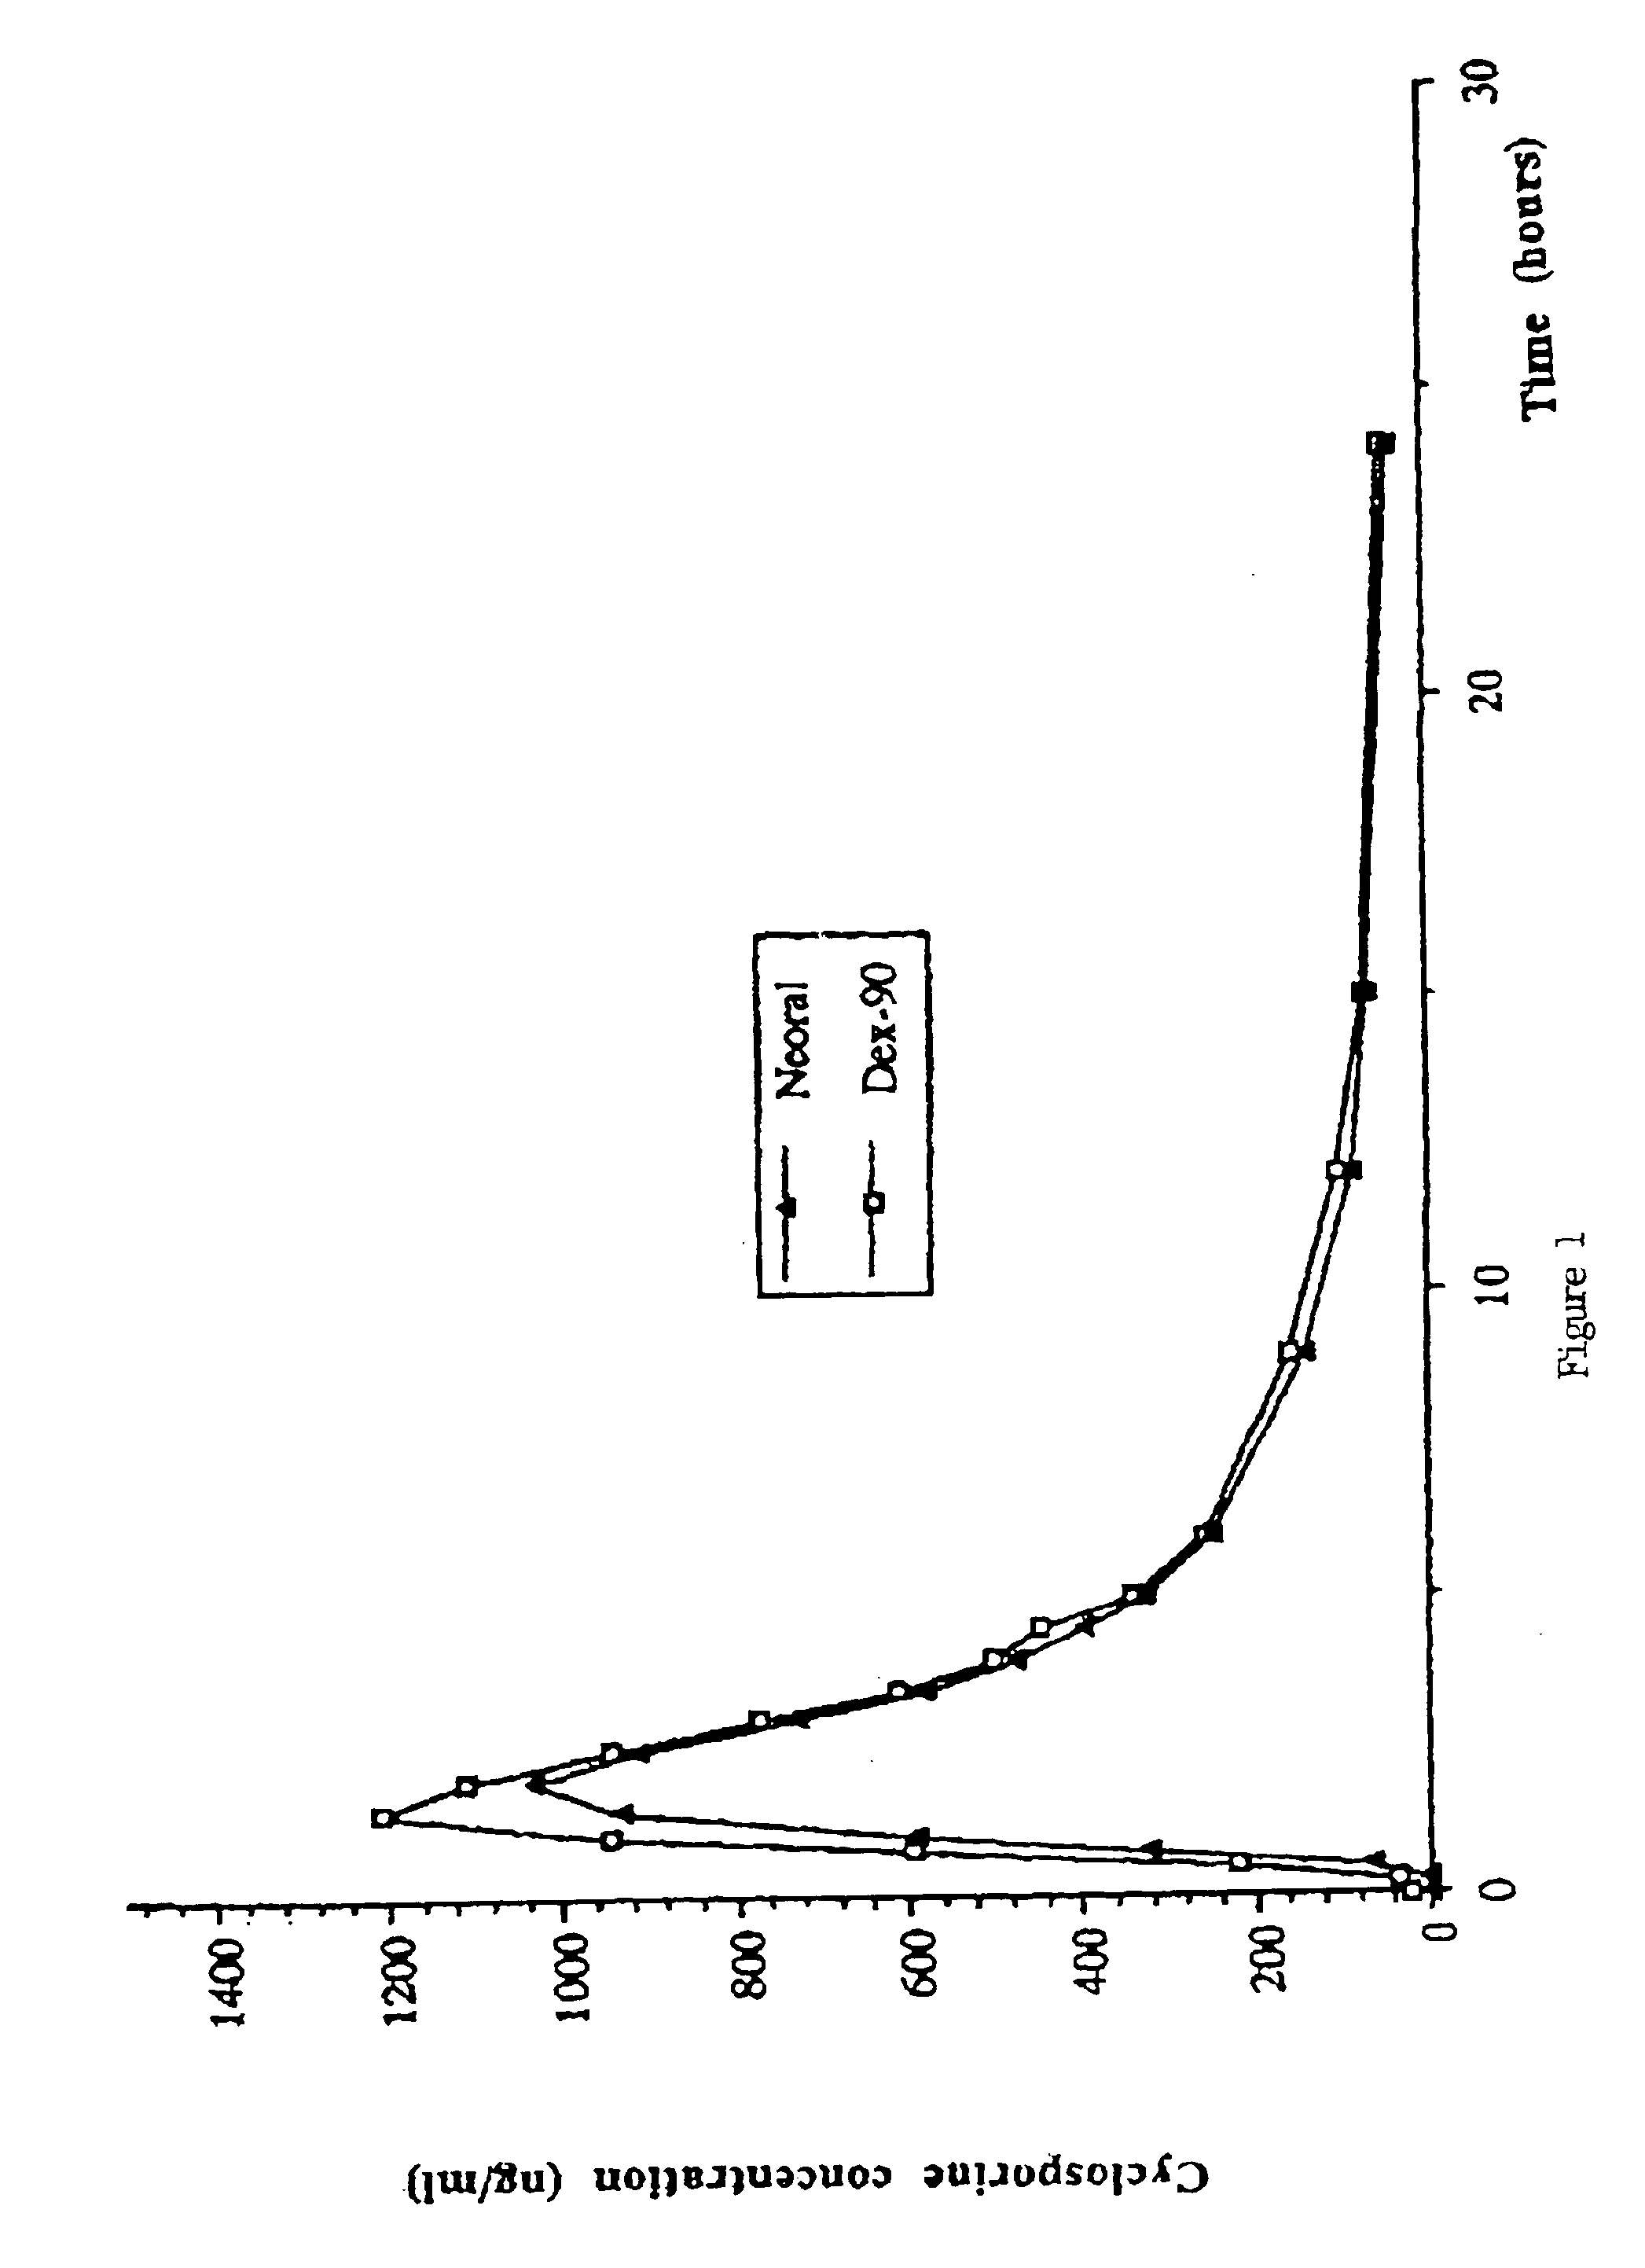 Dispersible concentrate for the delivery of cyclosprin